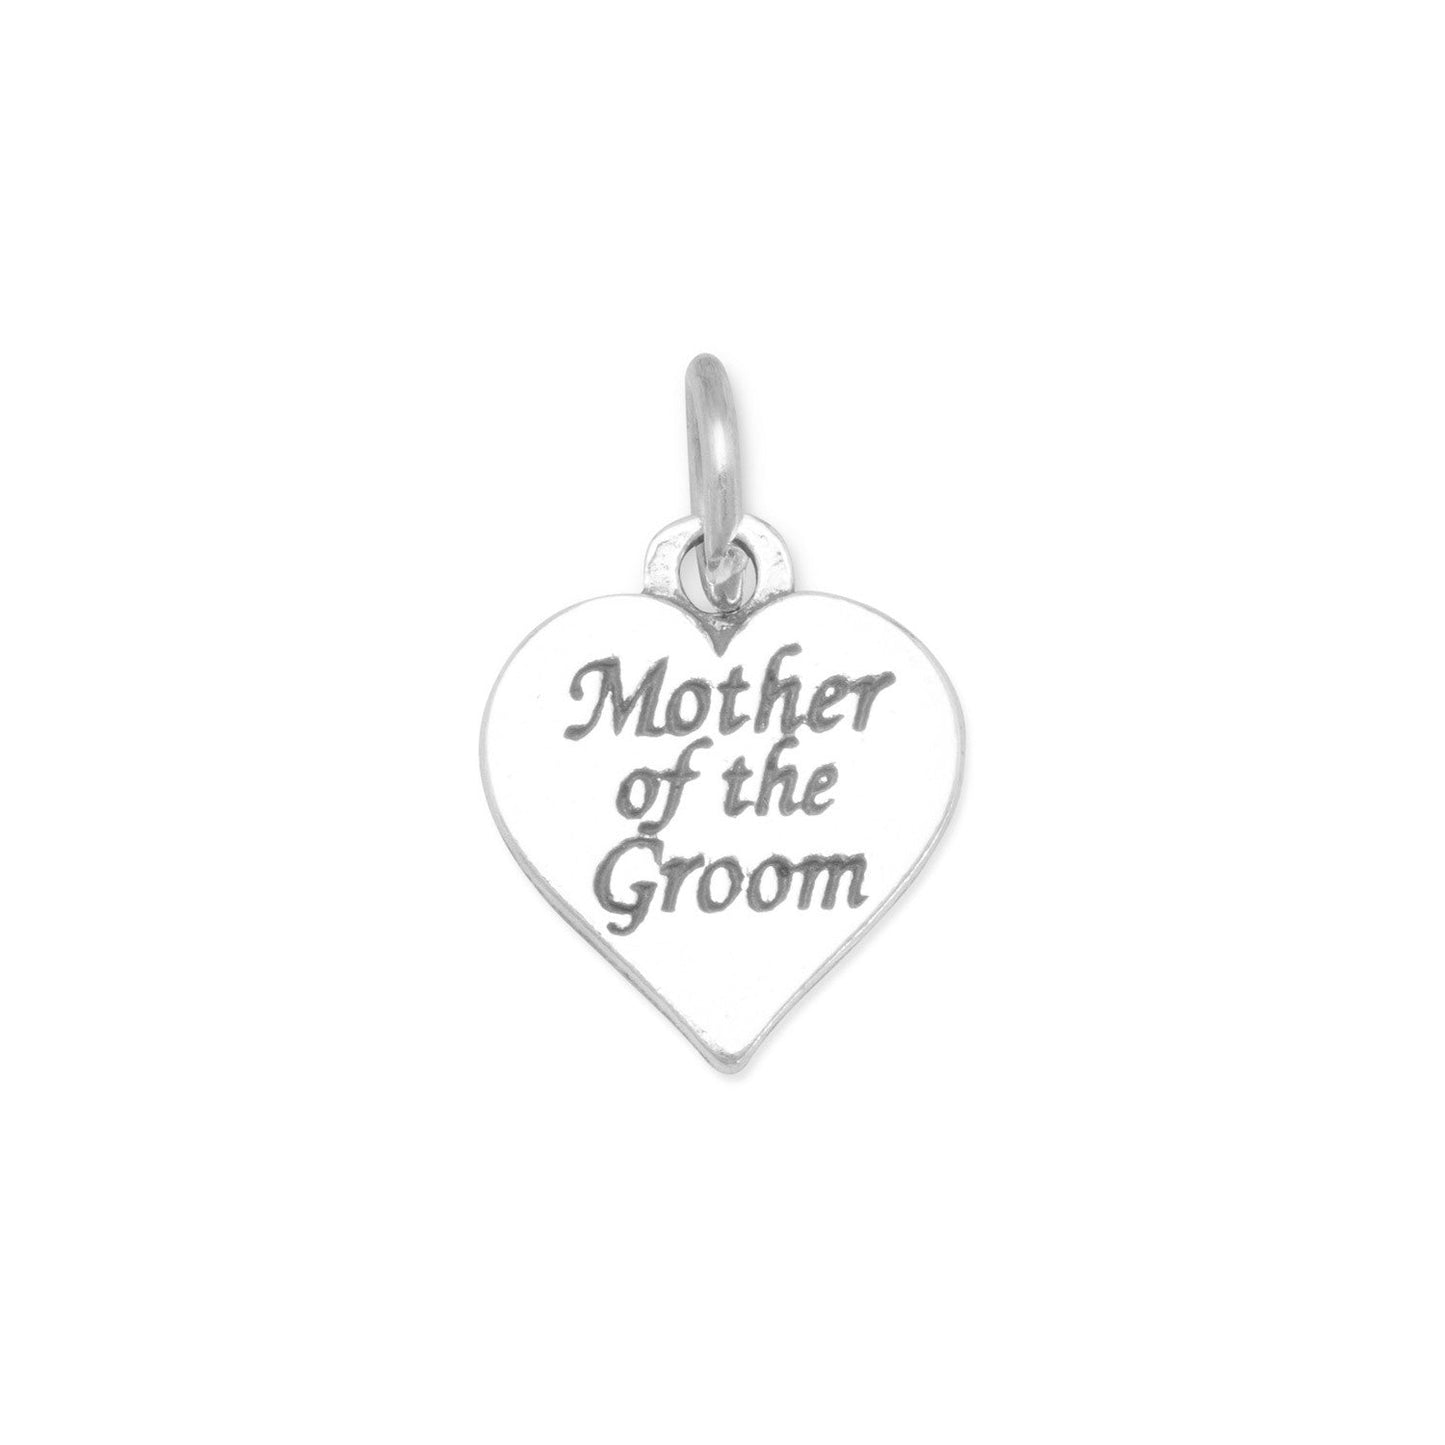 Oxidized Mother of the Groom Charm